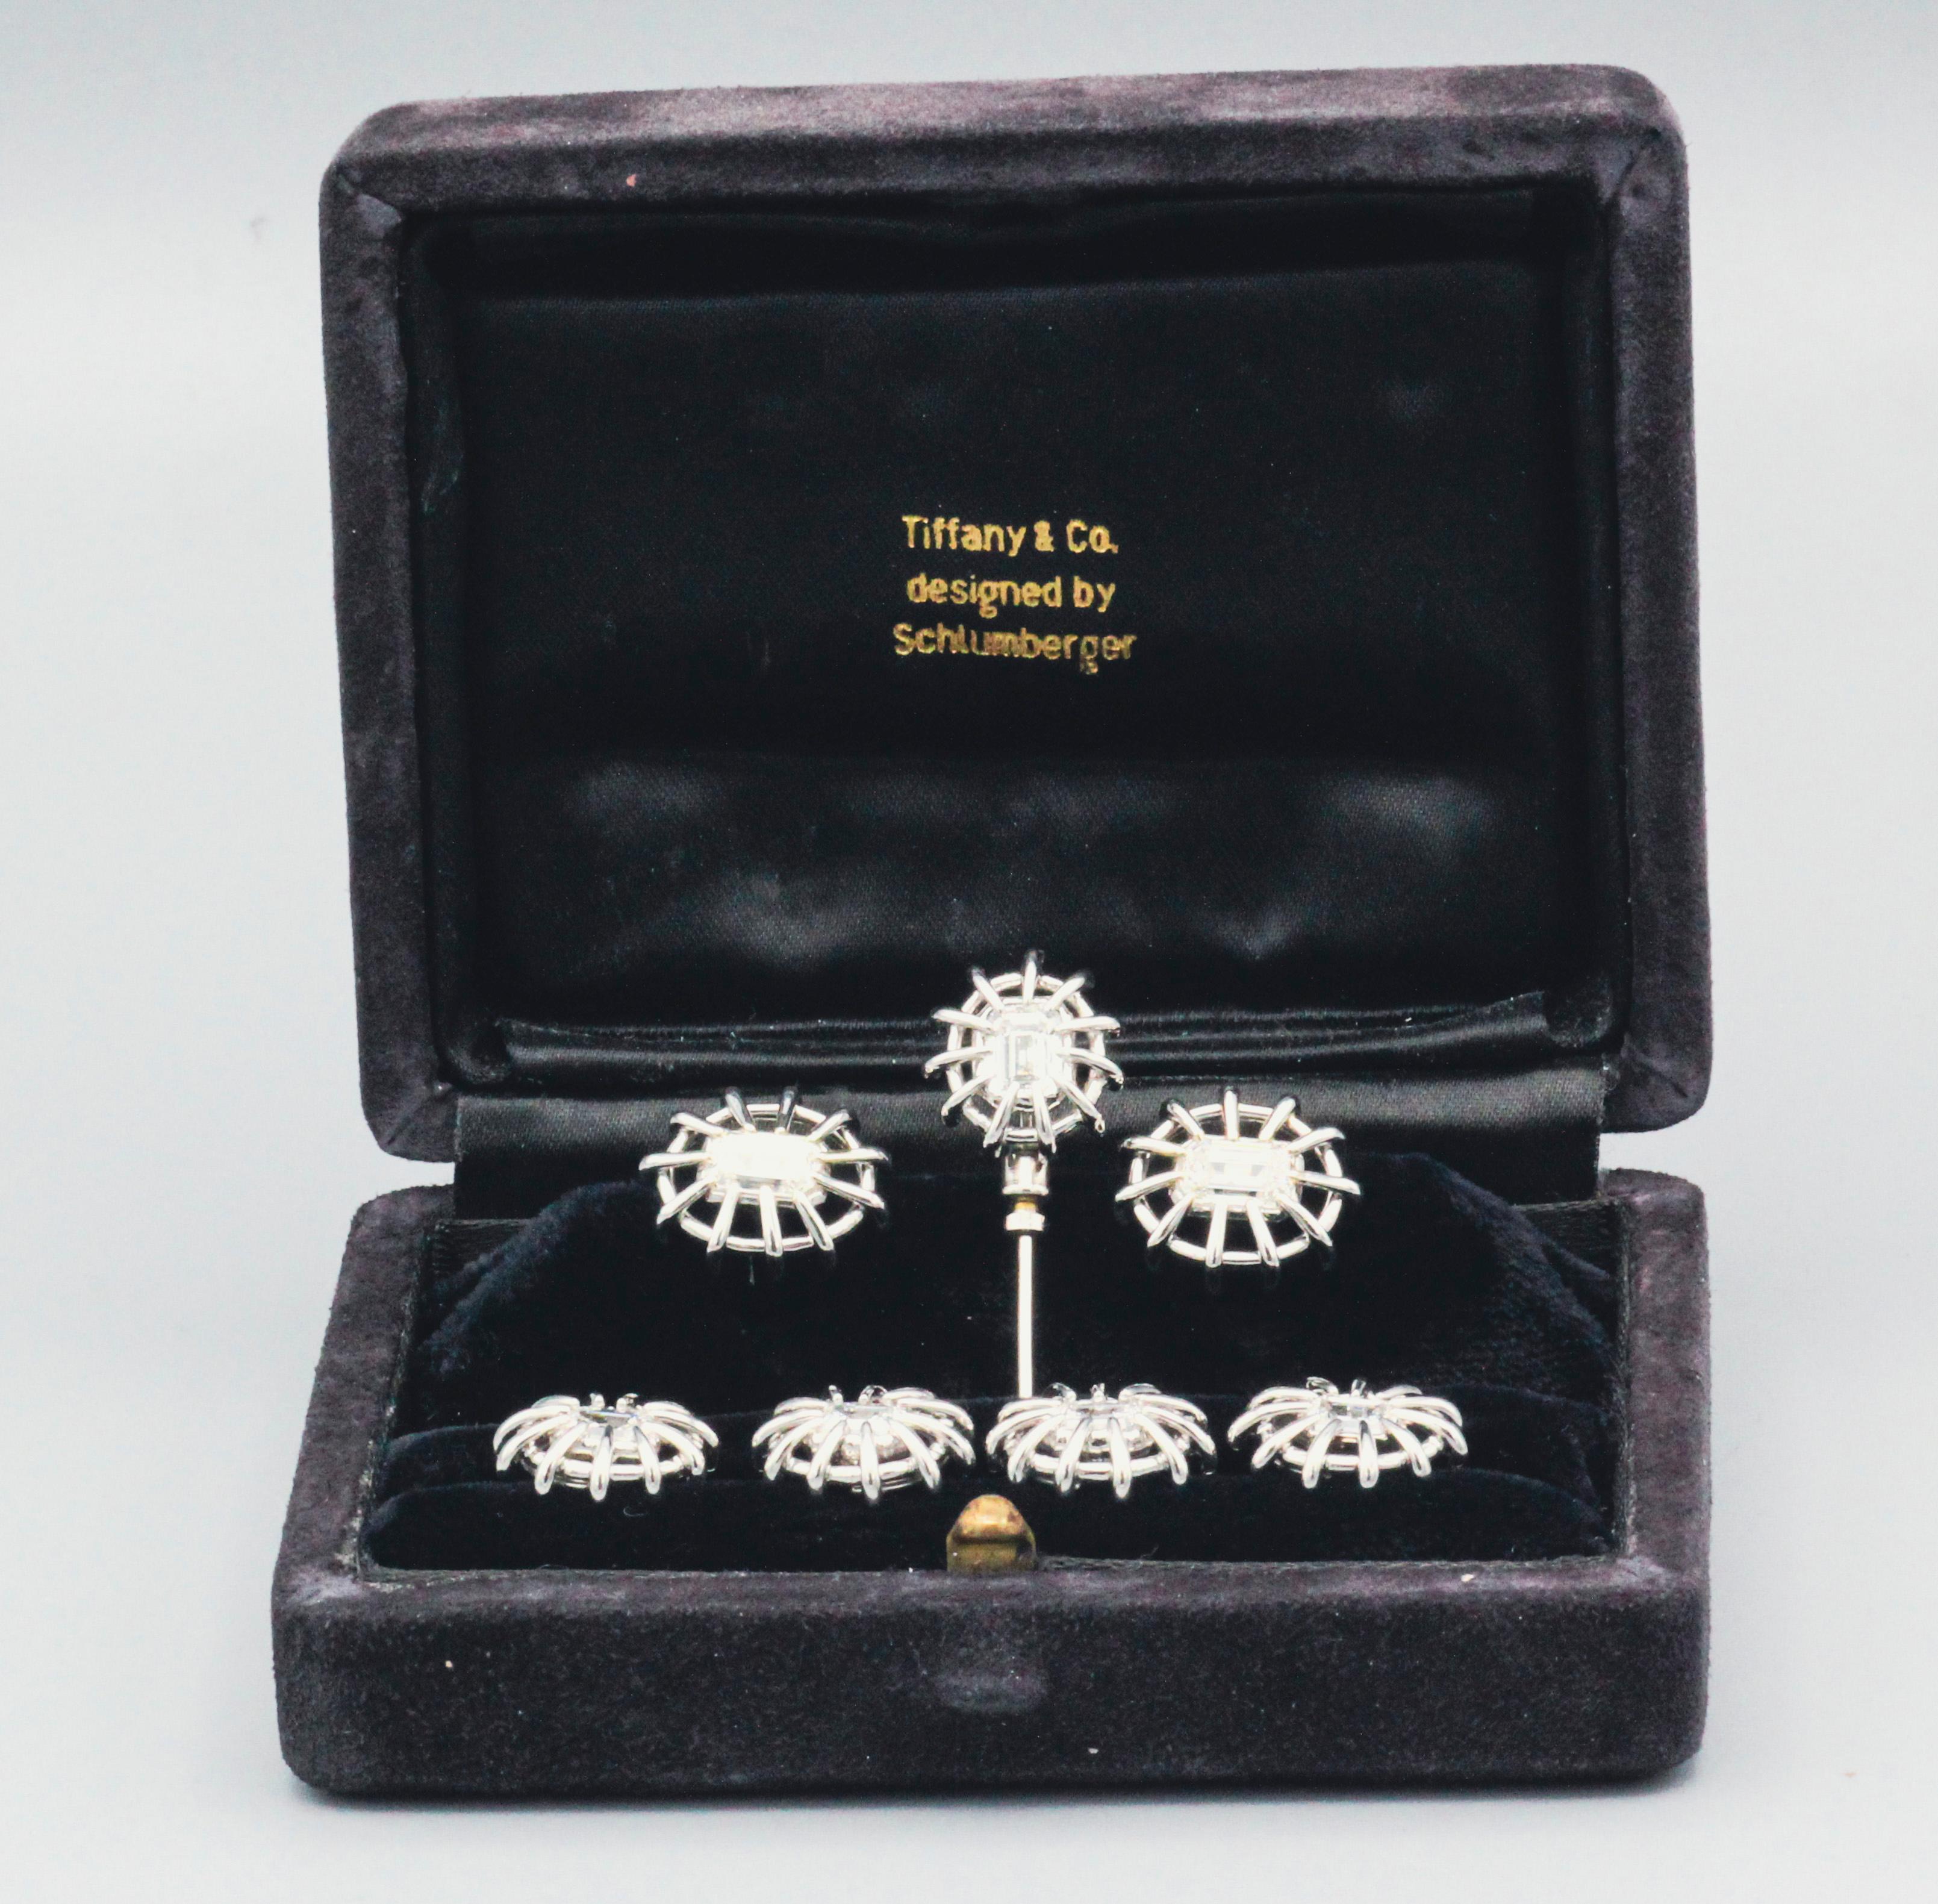 Unveil a Legacy of Elegance: Tiffany & Co. Schlumberger Diamond and Platinum Set

Embrace timeless sophistication with this exceptional TIFFANY & CO. Schlumberger diamond and platinum set, featuring cufflinks, studs, and a jabot pin. This isn't just